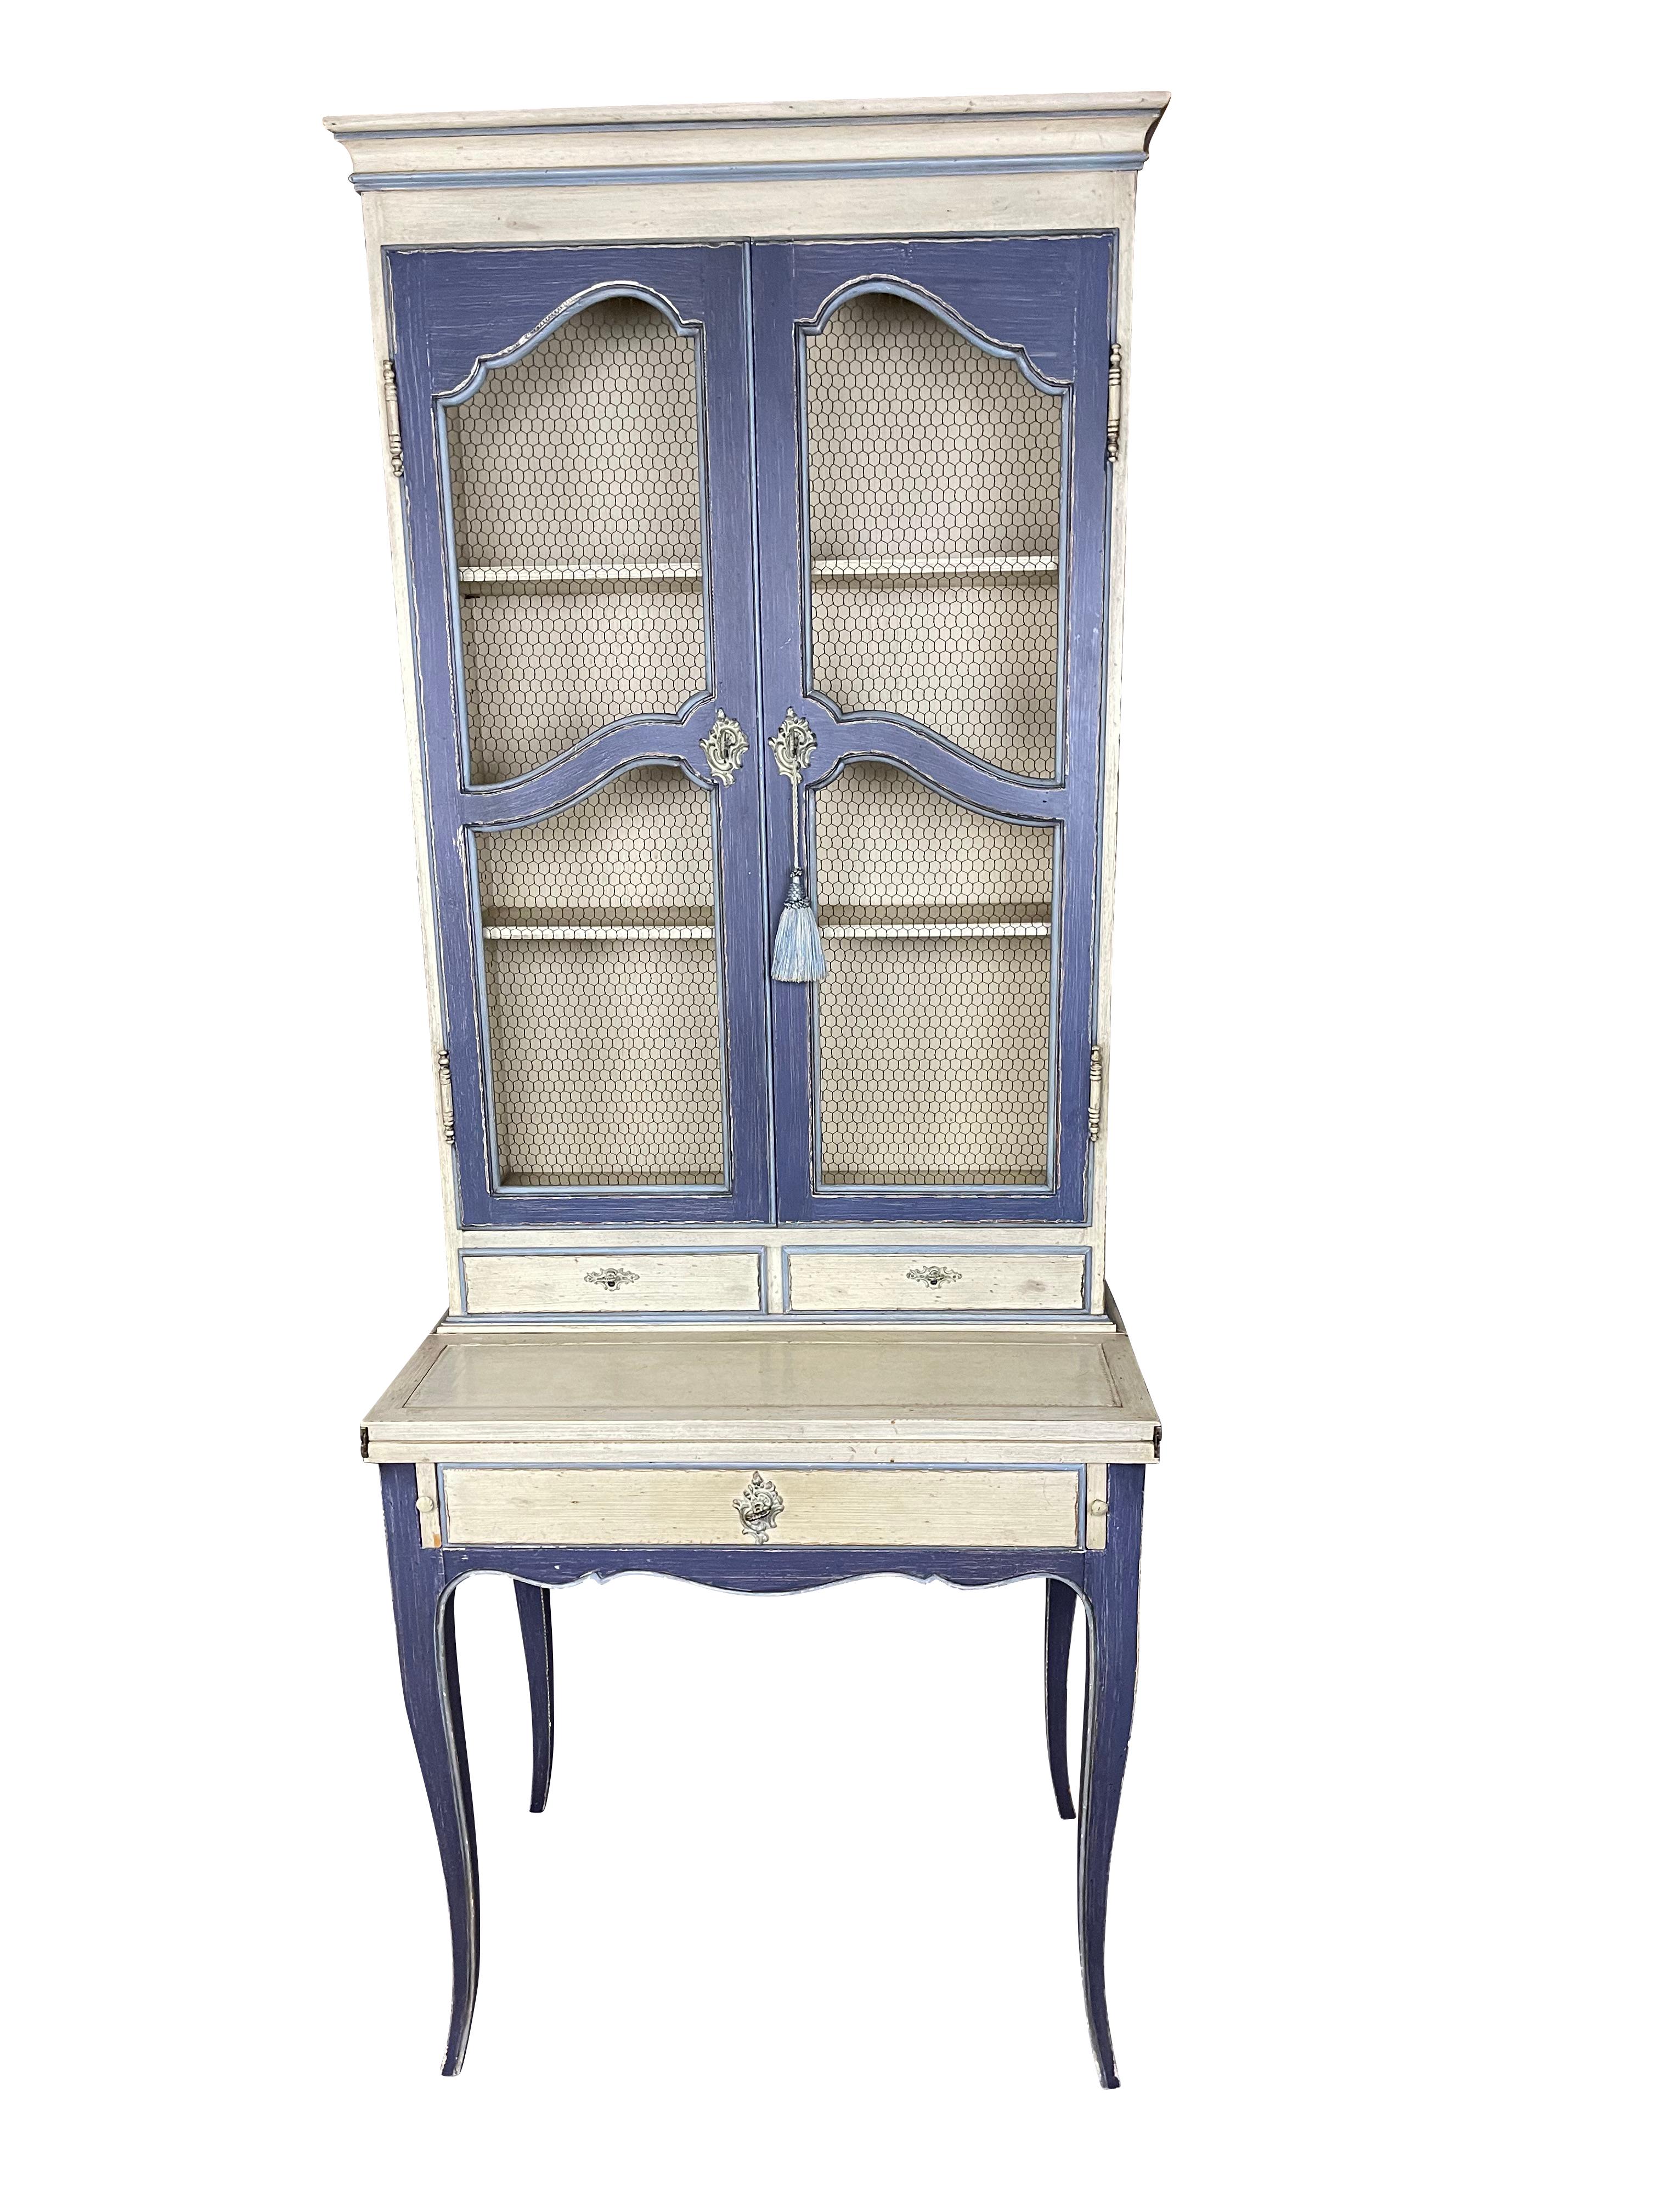 French country/ provincial hand-painted desk with wire fronted book shelves, drawer, and pull-out desk which opens to 18 inches.  The desk is painted in a lovely French blue and cream paint with an original key on a tassel. Arched wire doors are